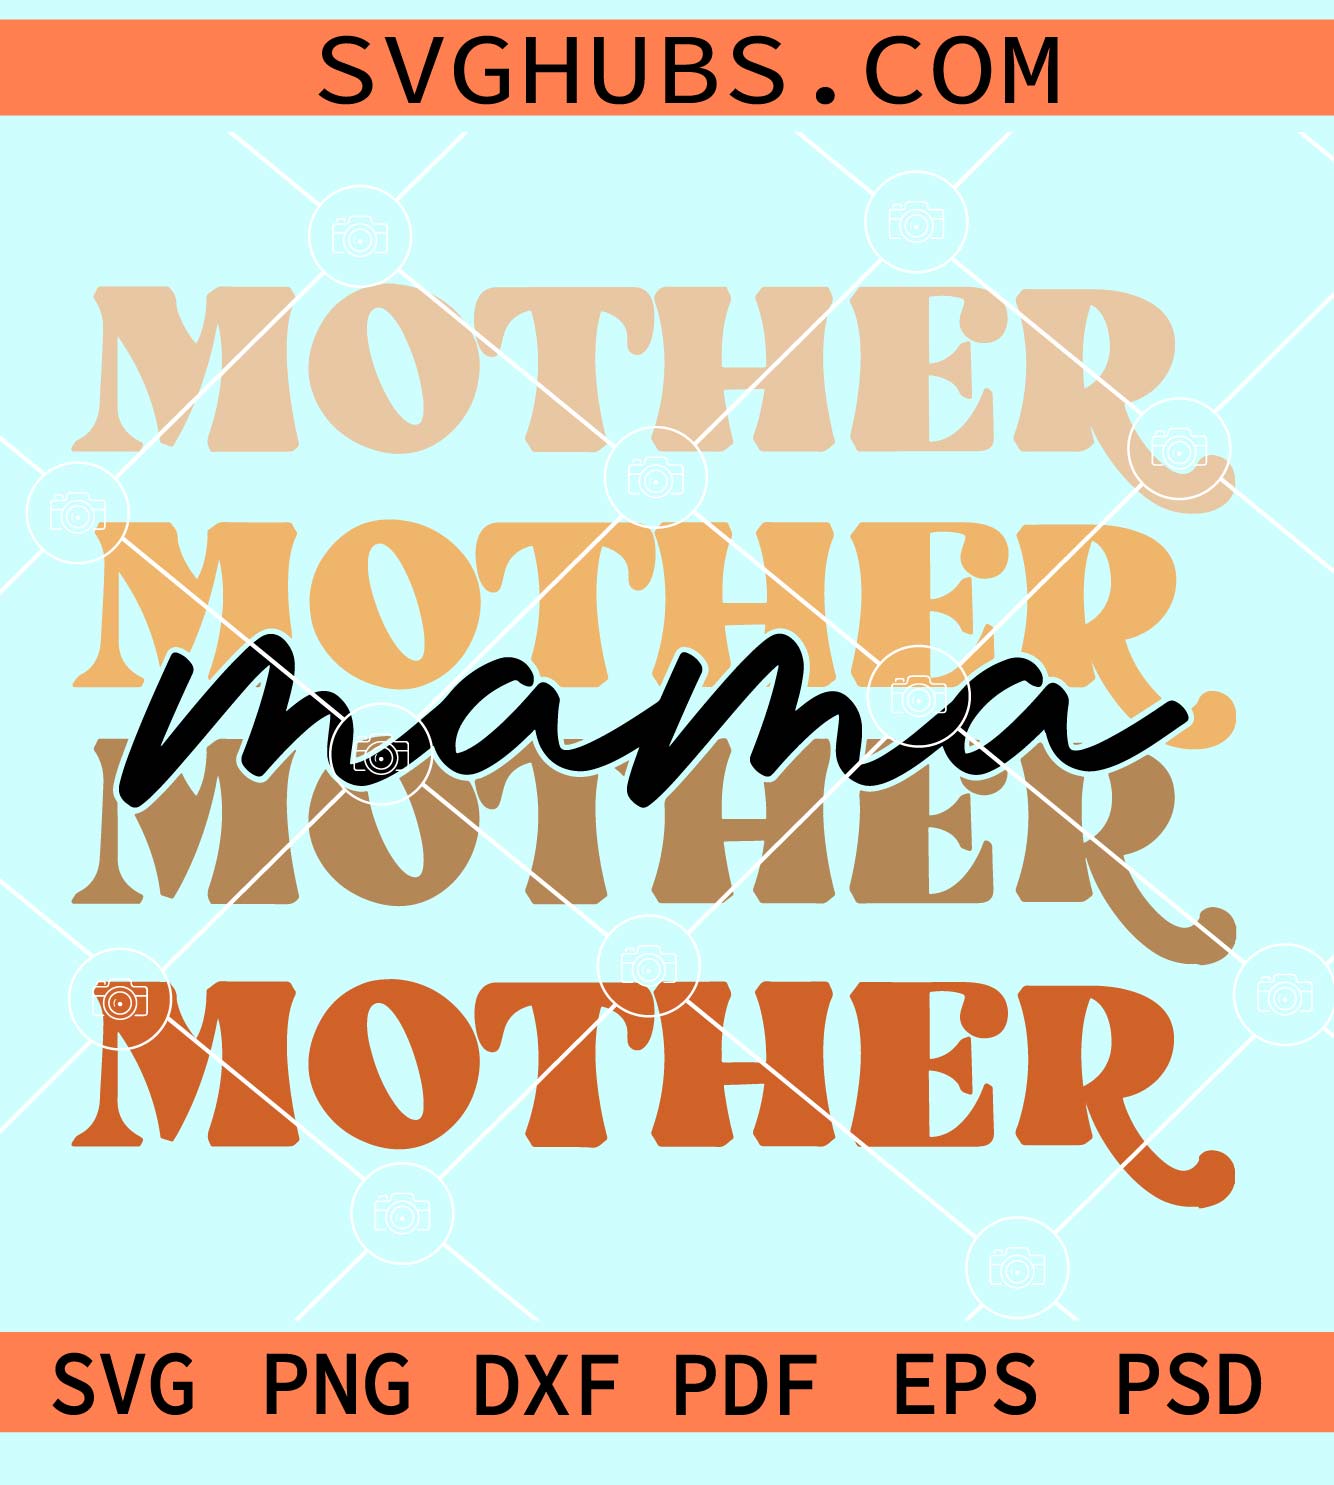 Decal Mom life Svg Silhouette Vector Cut file Cricut Stacked Mama Svg Mommy Svg Pdf Png Eps Dxf Retro Mother Shirt Stencil. Sticker